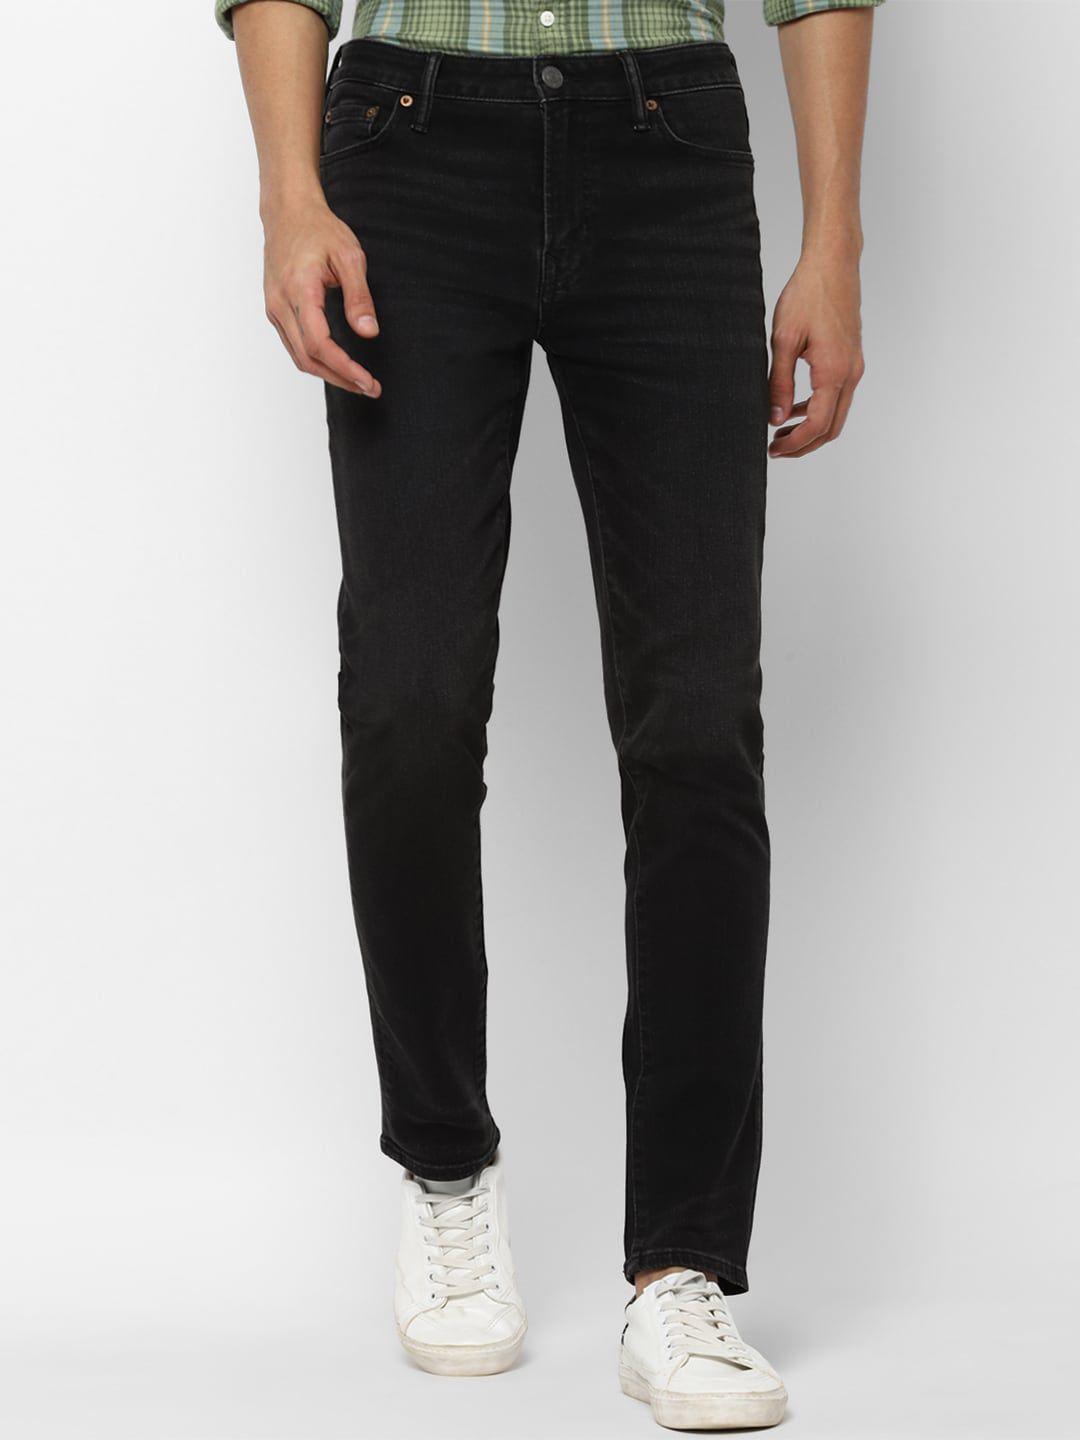 american eagle outfitters men black slim fit jeans